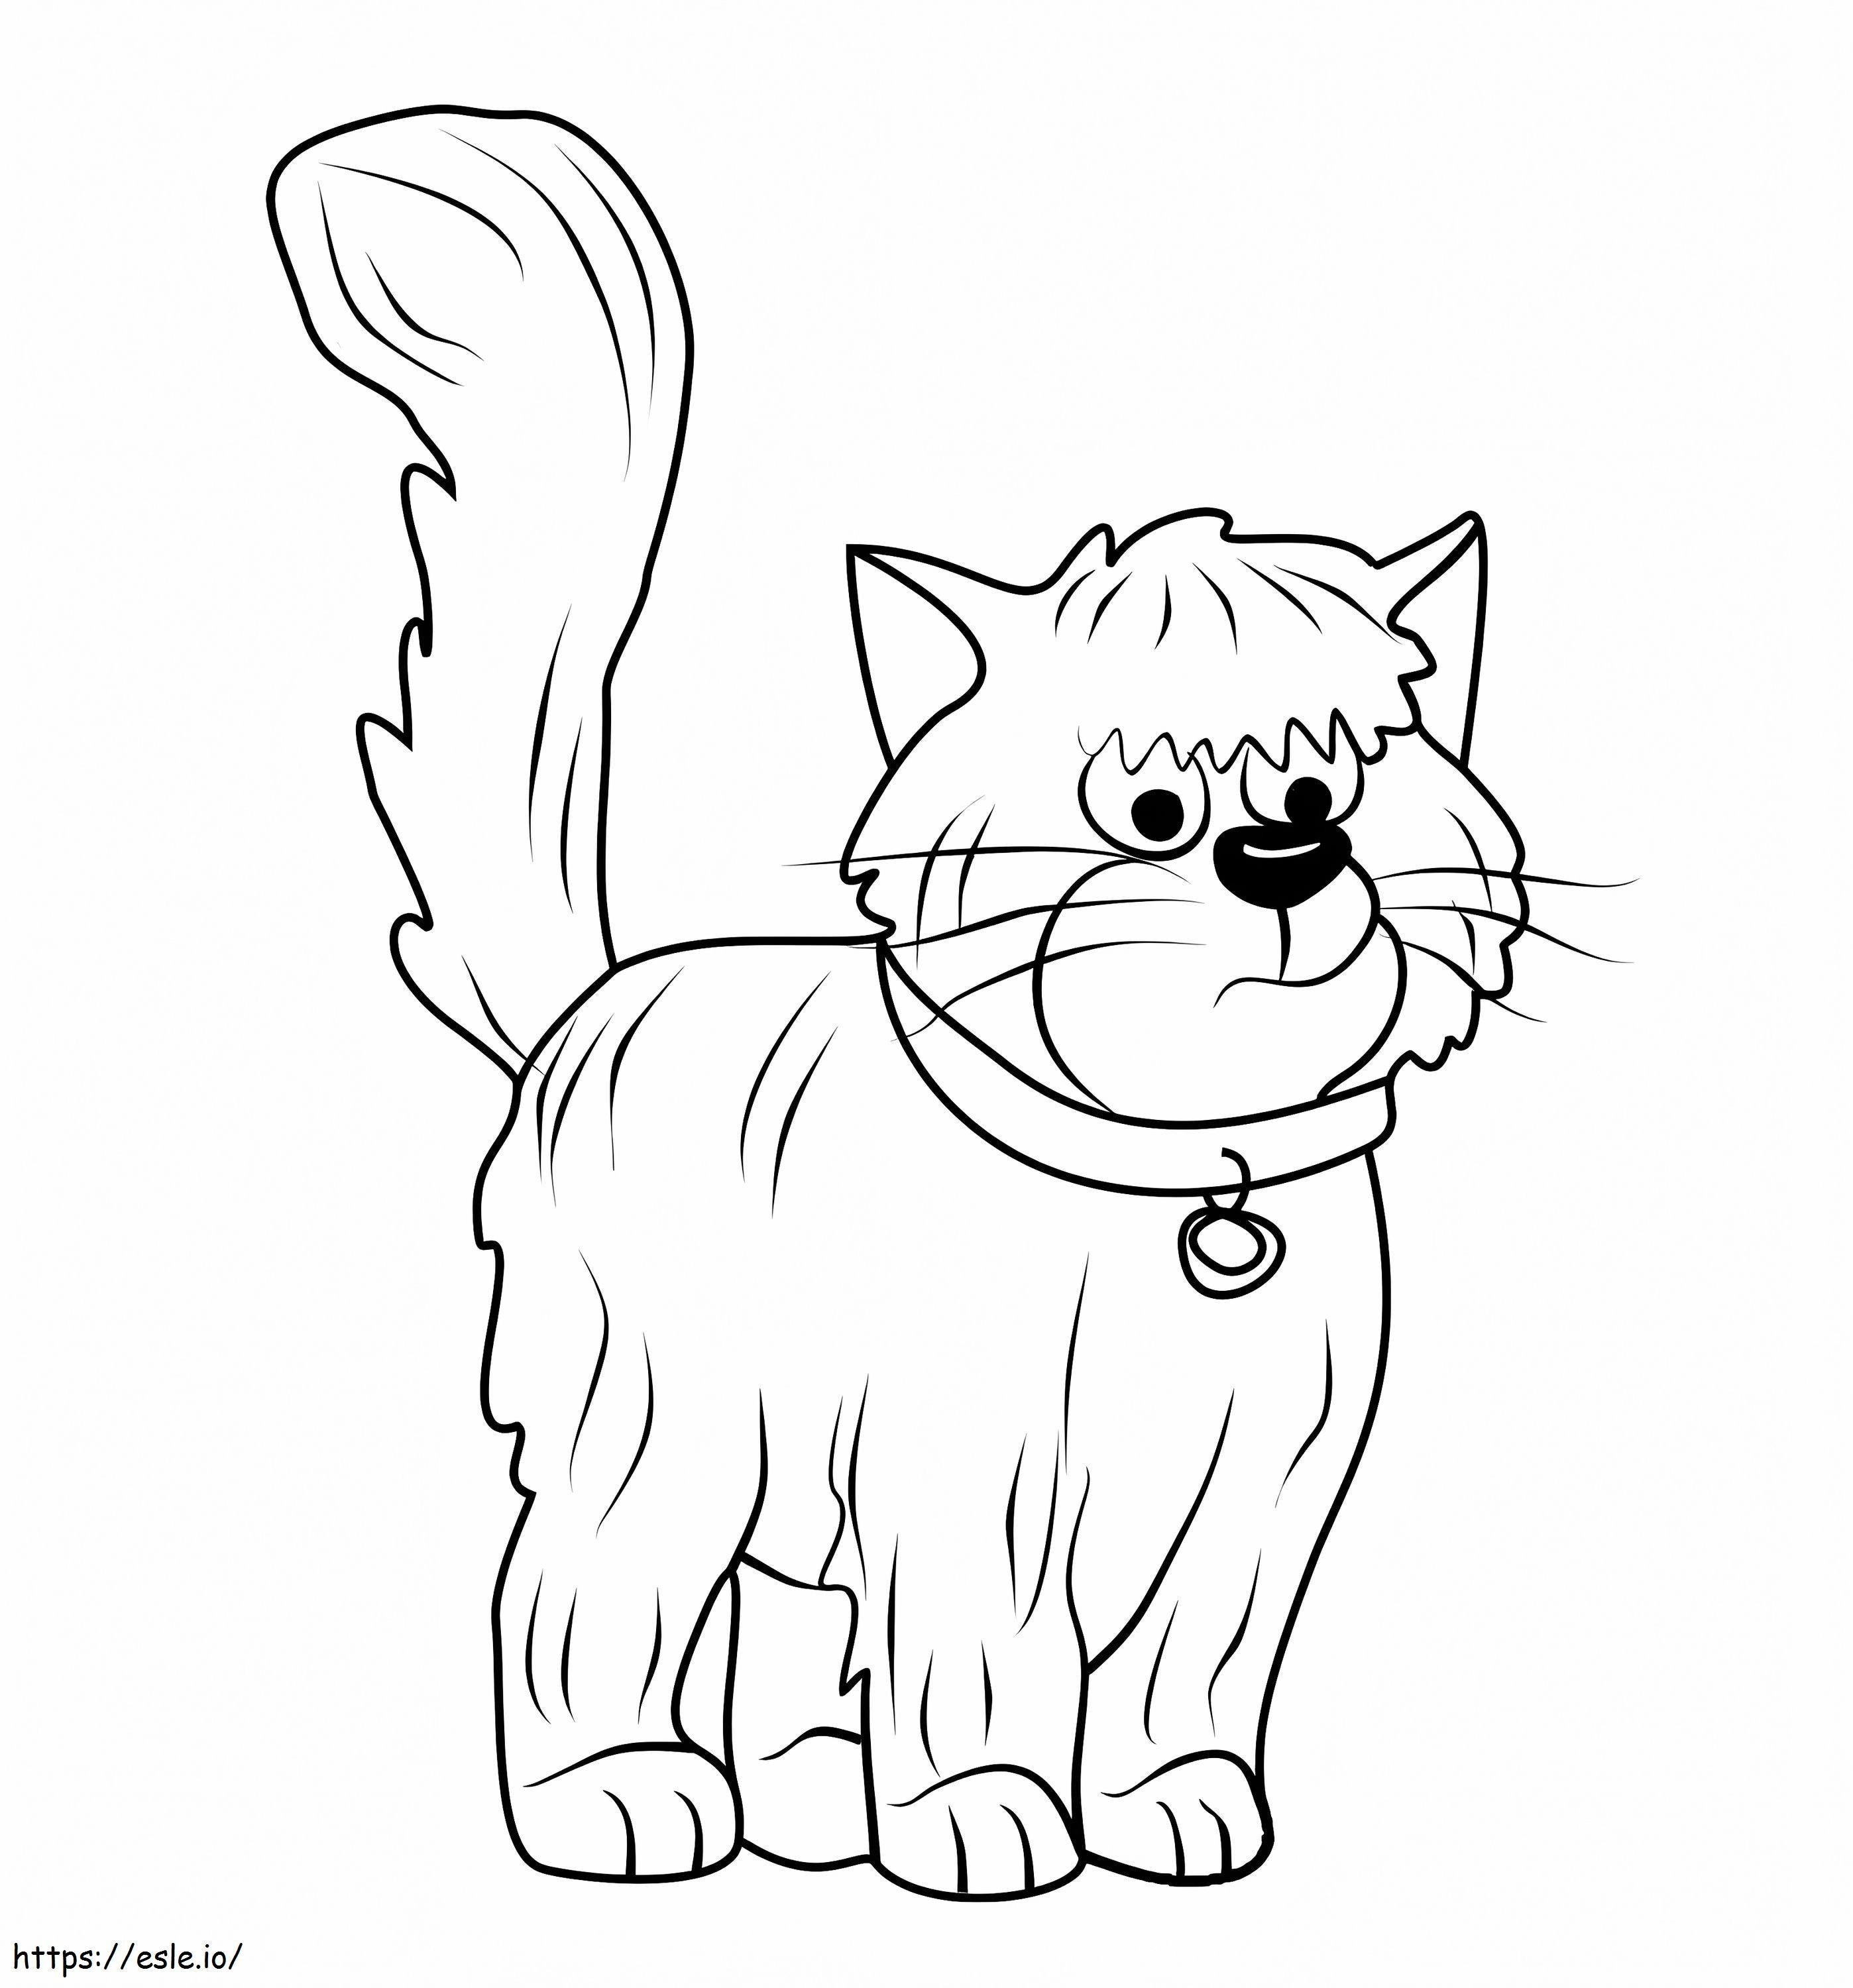 Tiny From Pound Puppies coloring page